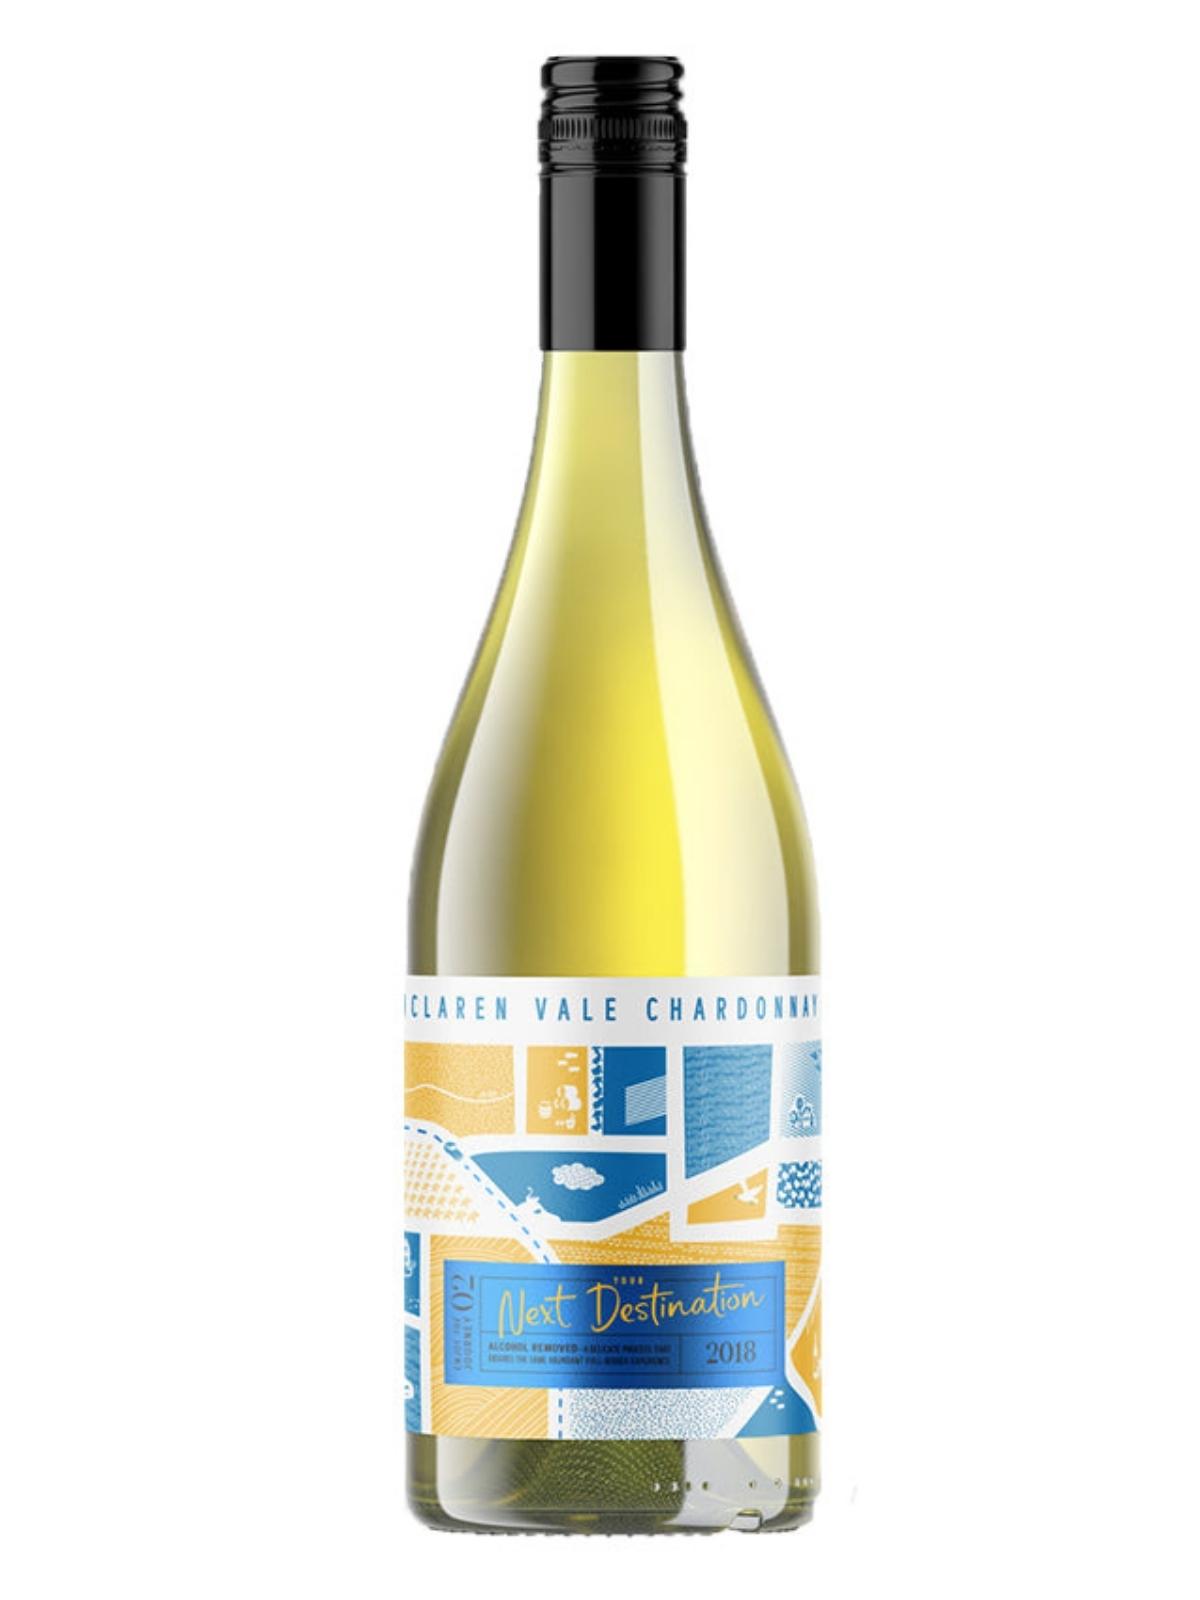 bottle of alcohol-free Next Destination chardonnay with a blue and yellow label and black lid.